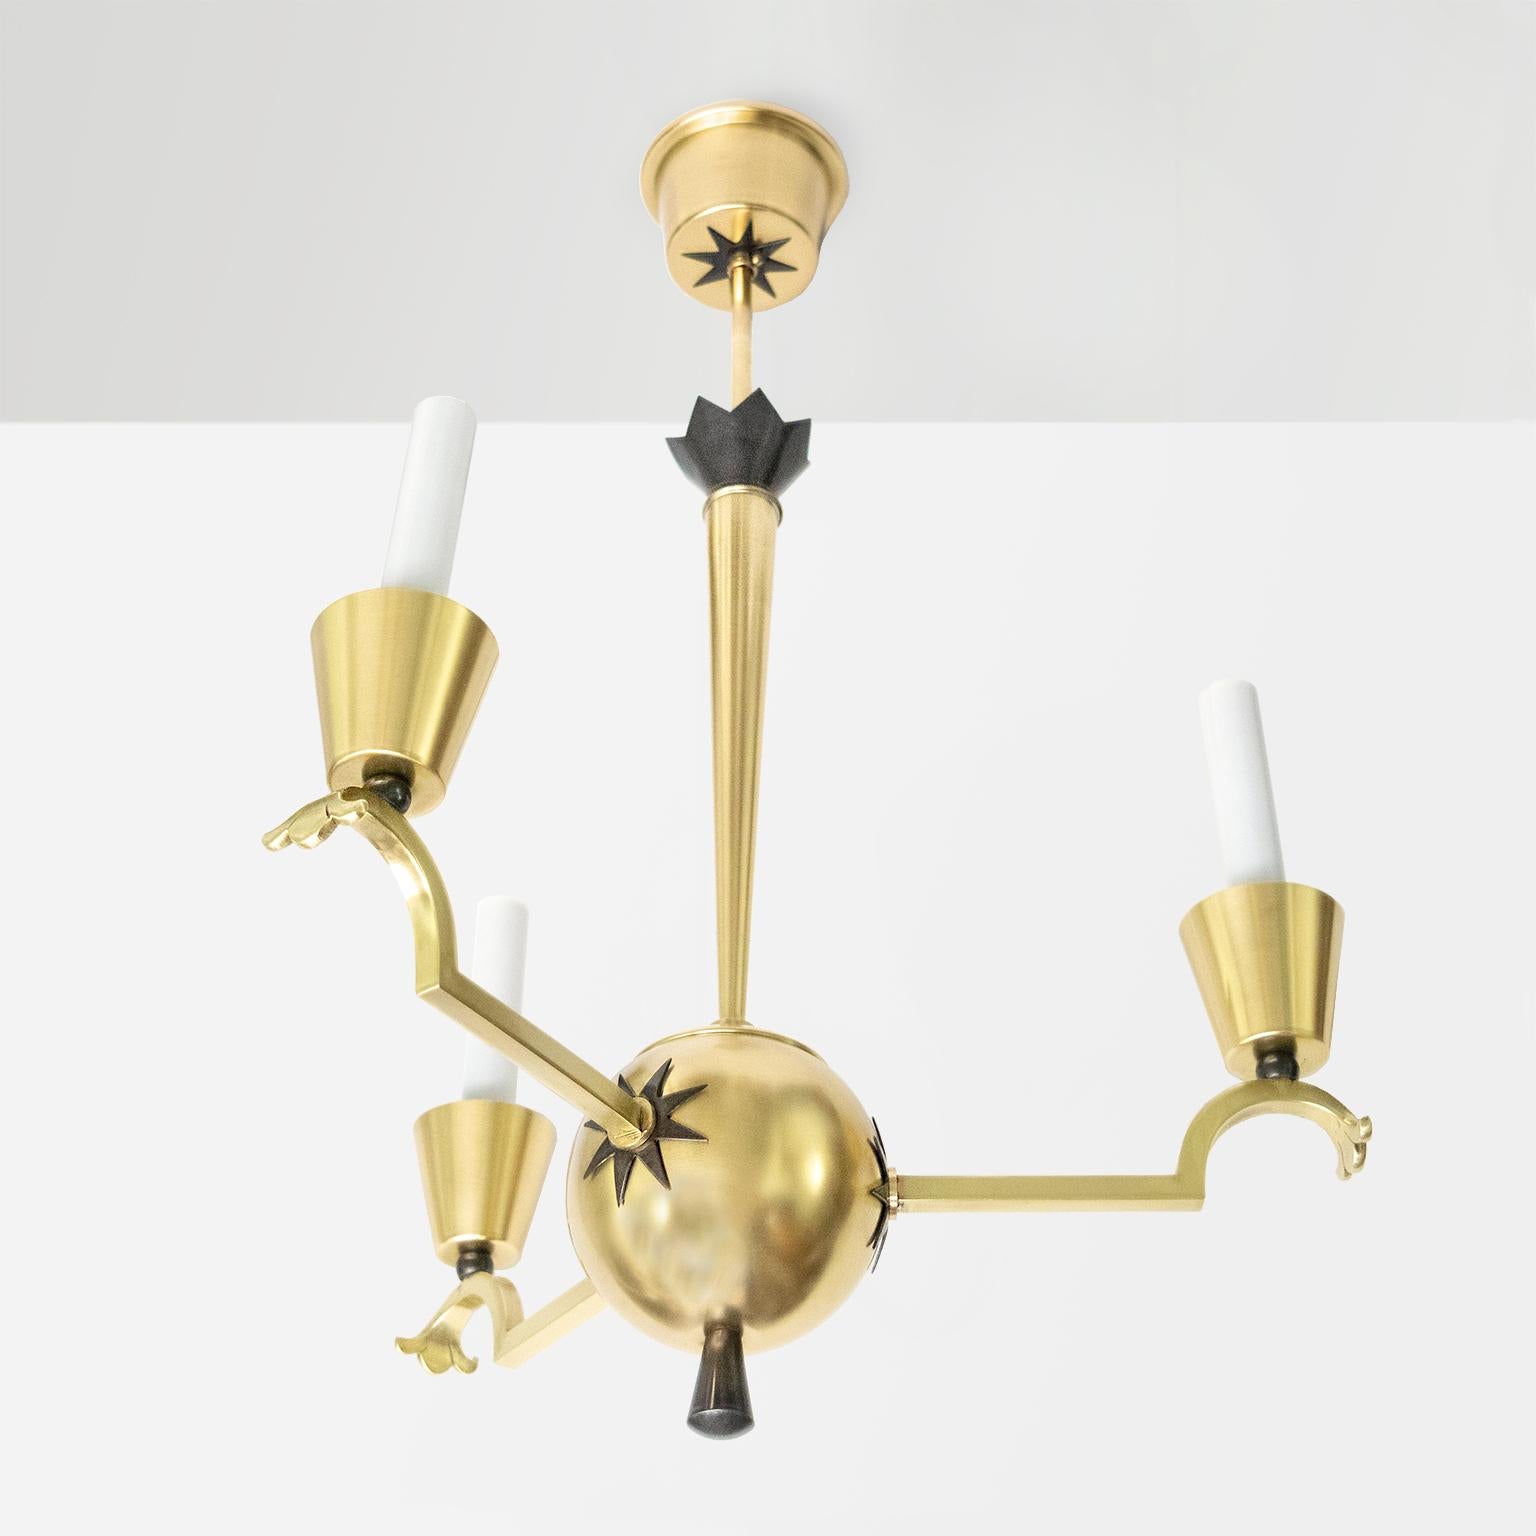 Elegant Swedish Grace three-arm chandelier in polished and patinated brass design by Elis Bergh for C.G, Hallberg, Stockholm, Sweden late 1920s-early 1930s. Newly polished and lacquered and re-wired with 3 candelabra sockets for use in the USA.